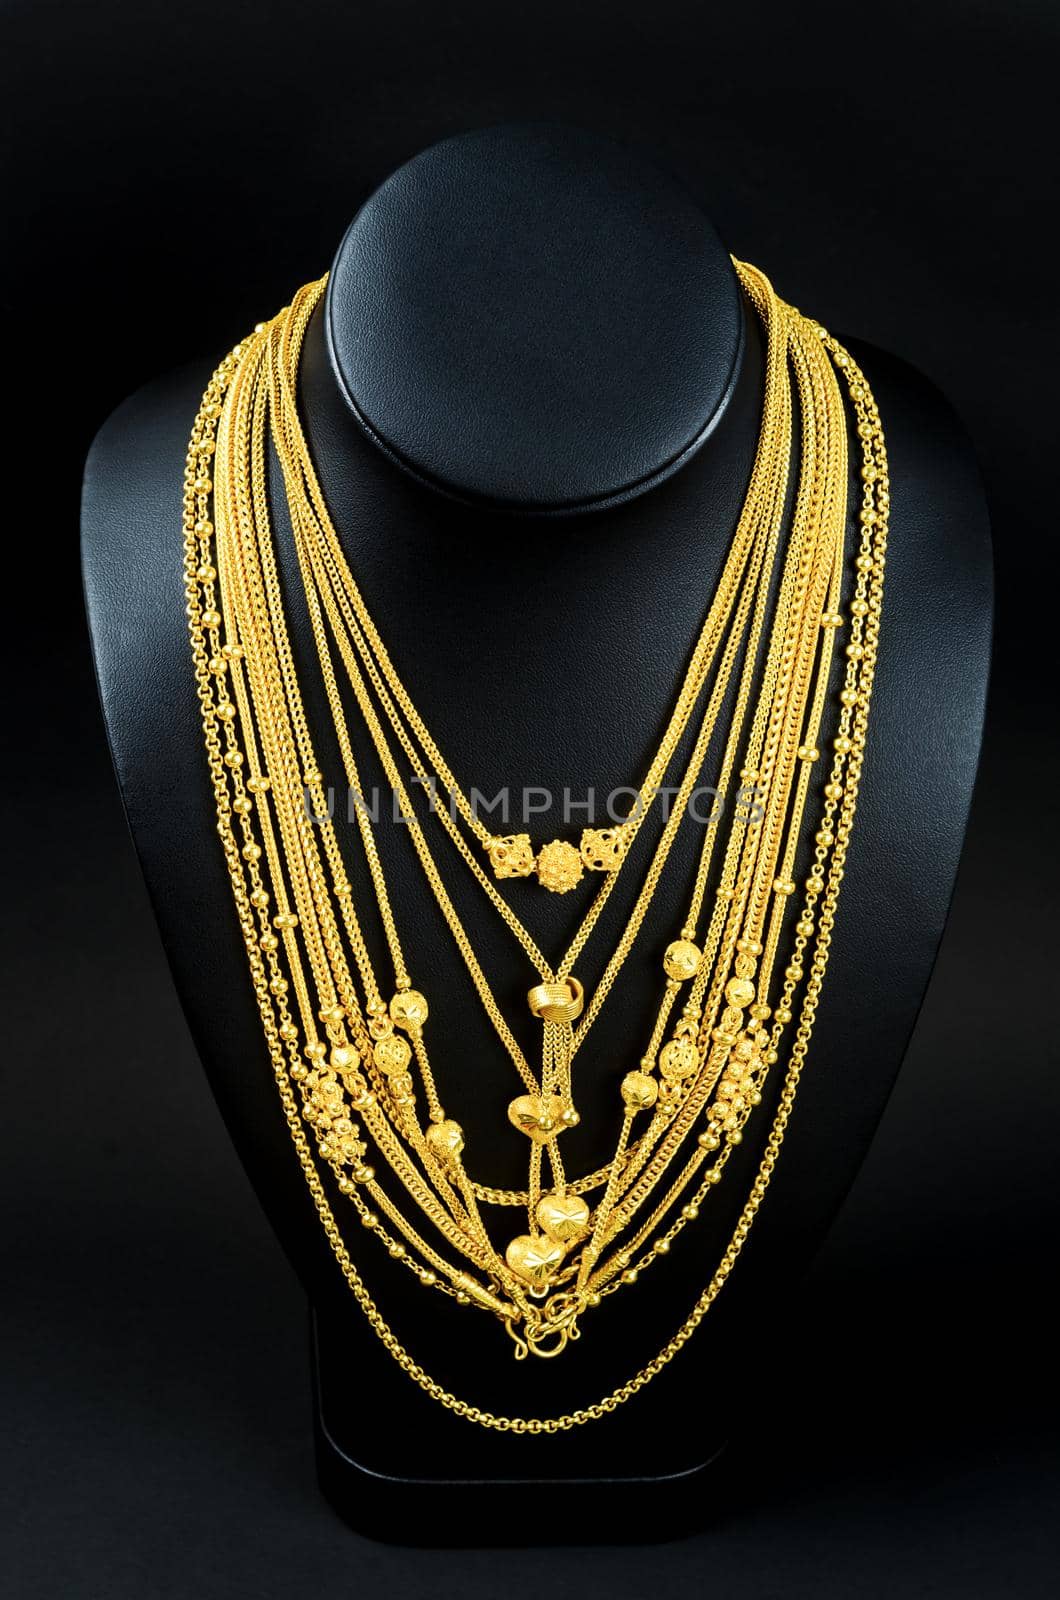 Necklace display stand with gold necklace on black background. by Gamjai